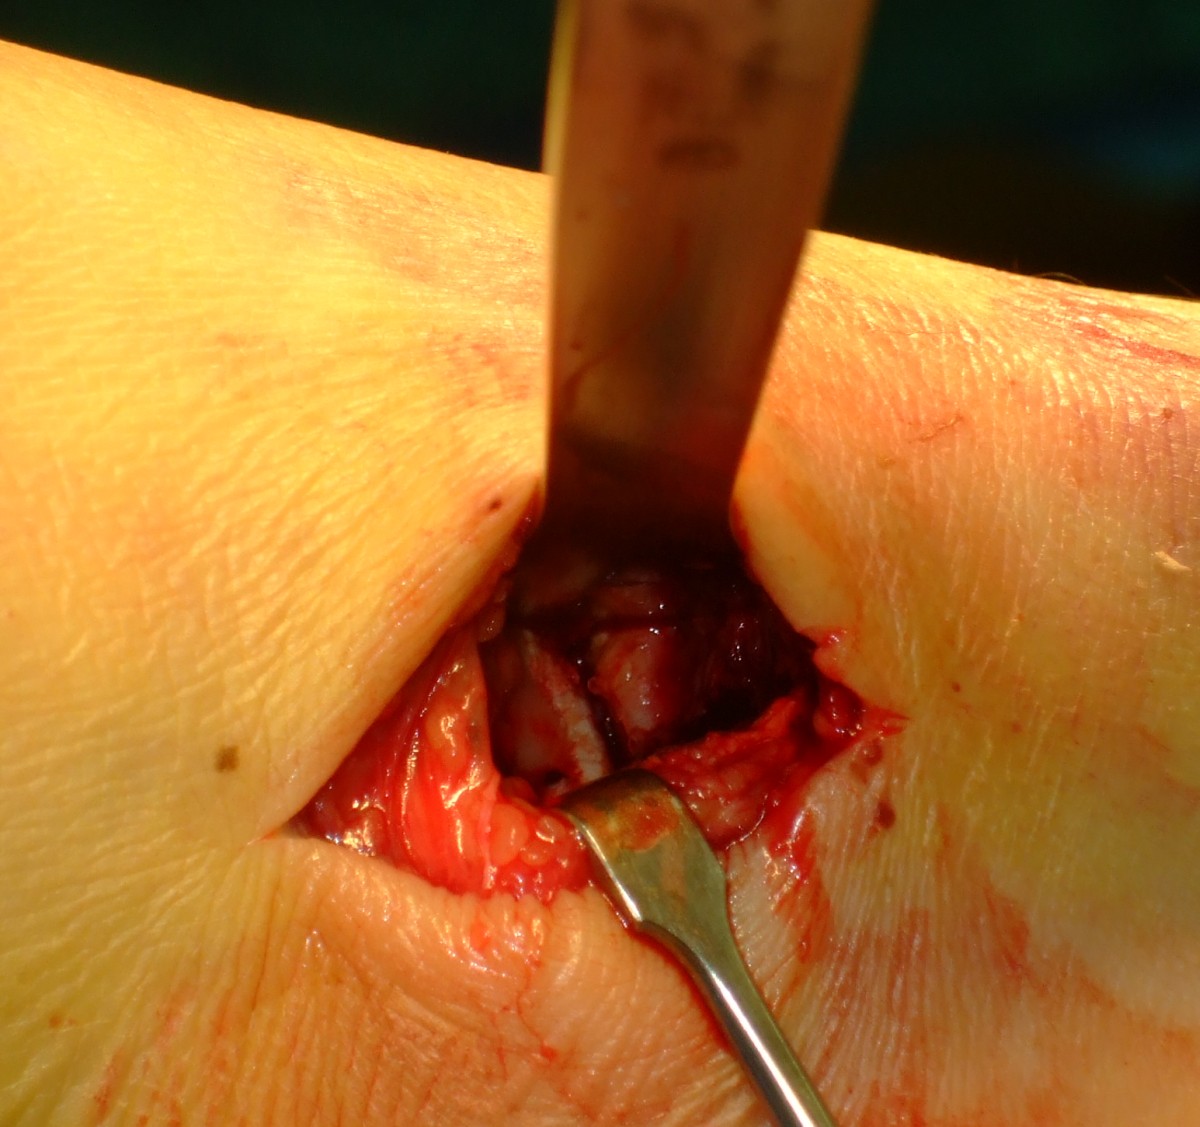 Close-up of the larger small incision on the inside of the leg